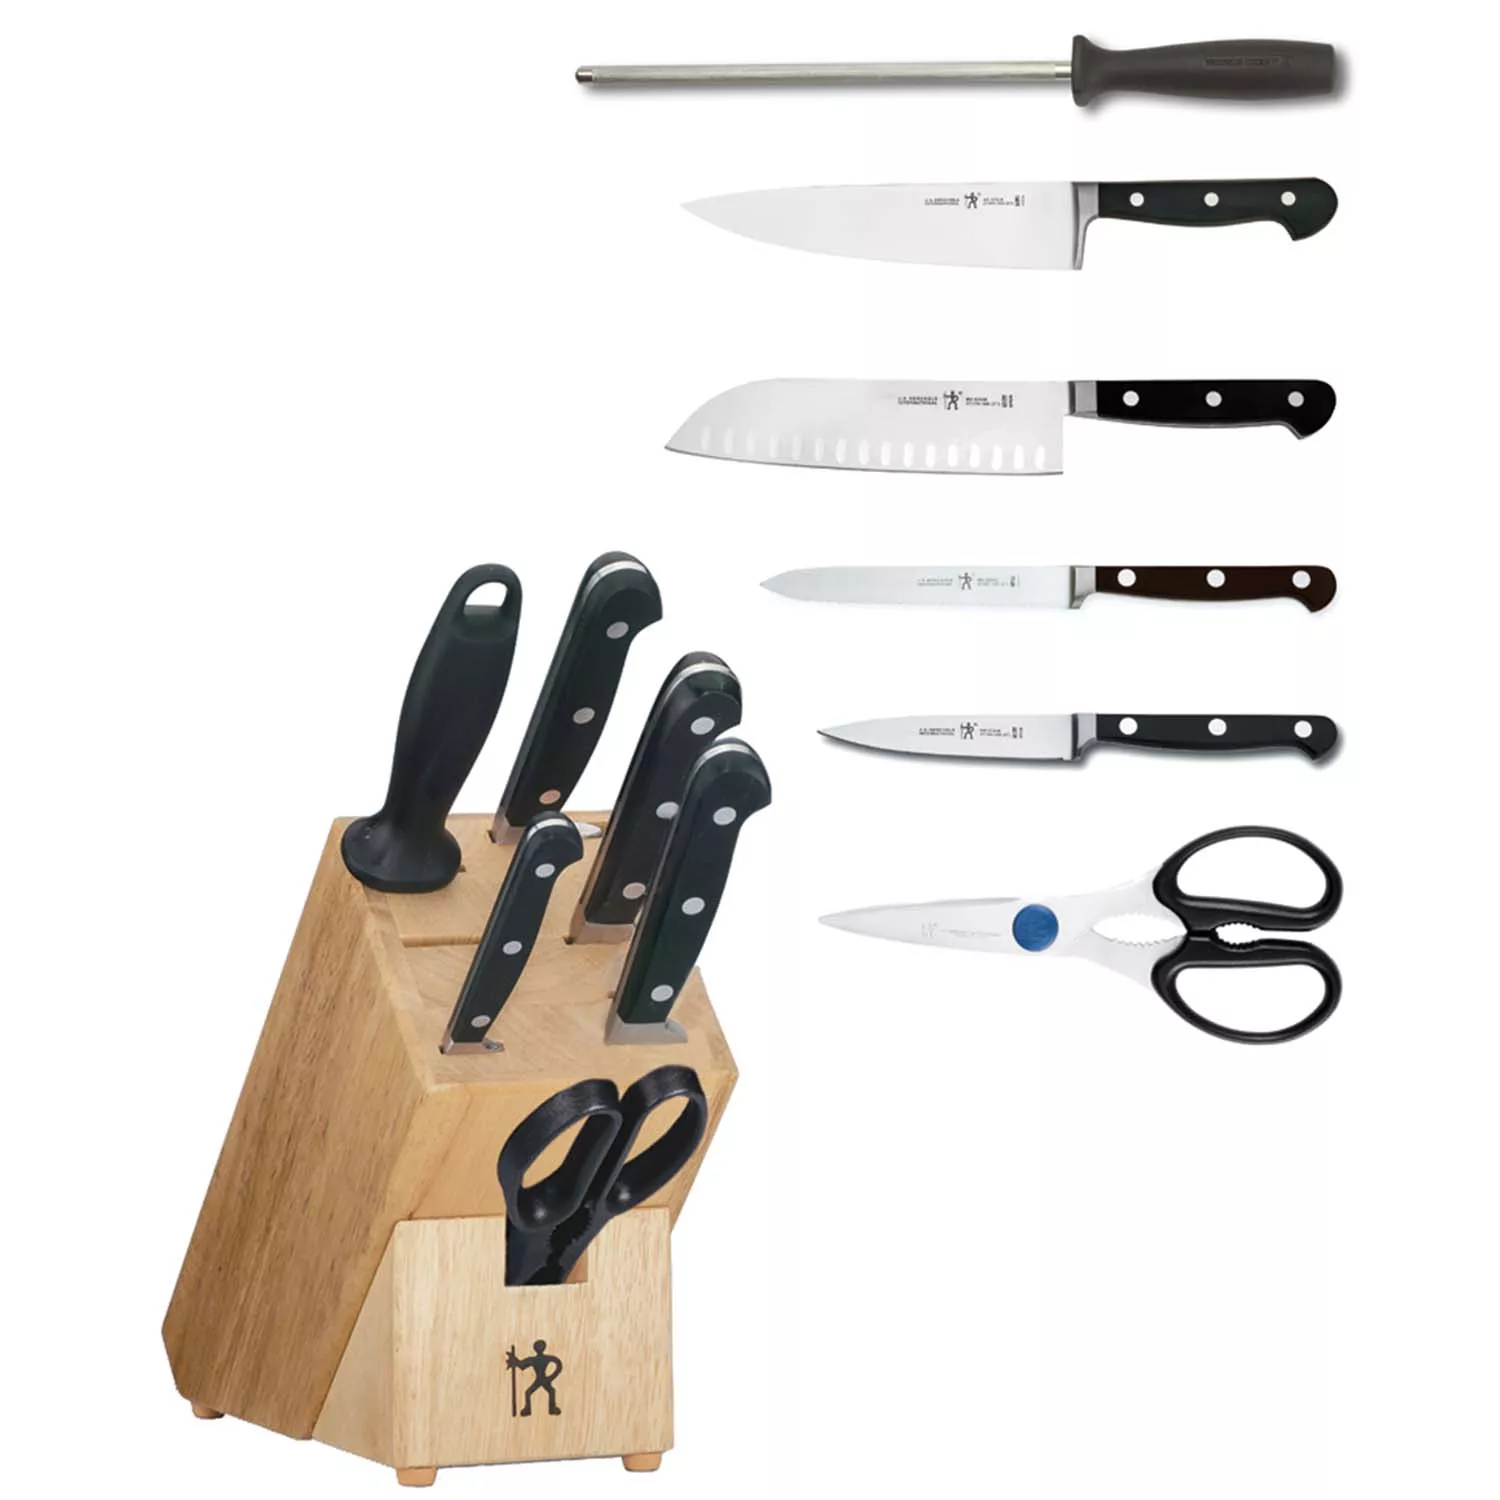 BERGHOFF Worldwide German Made 15-Pcs Knife Set With Knife Block () for  sale online